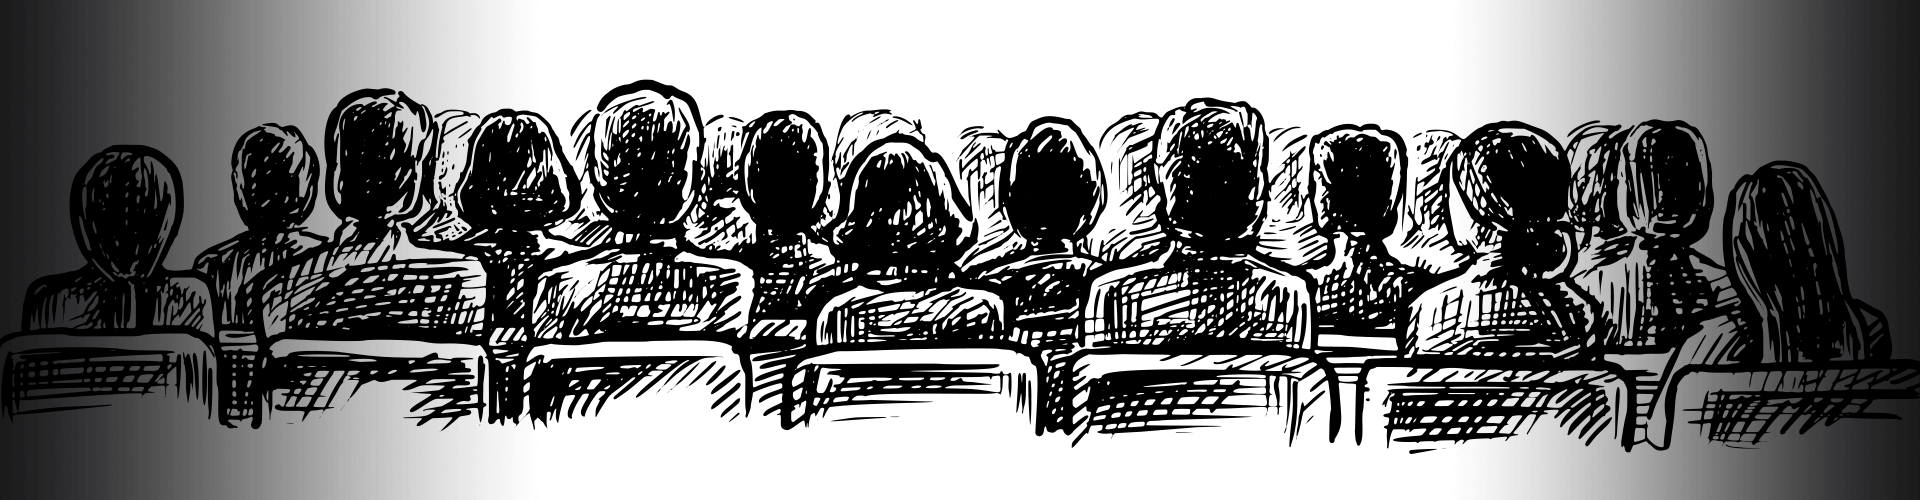 Sketch of audience members from back